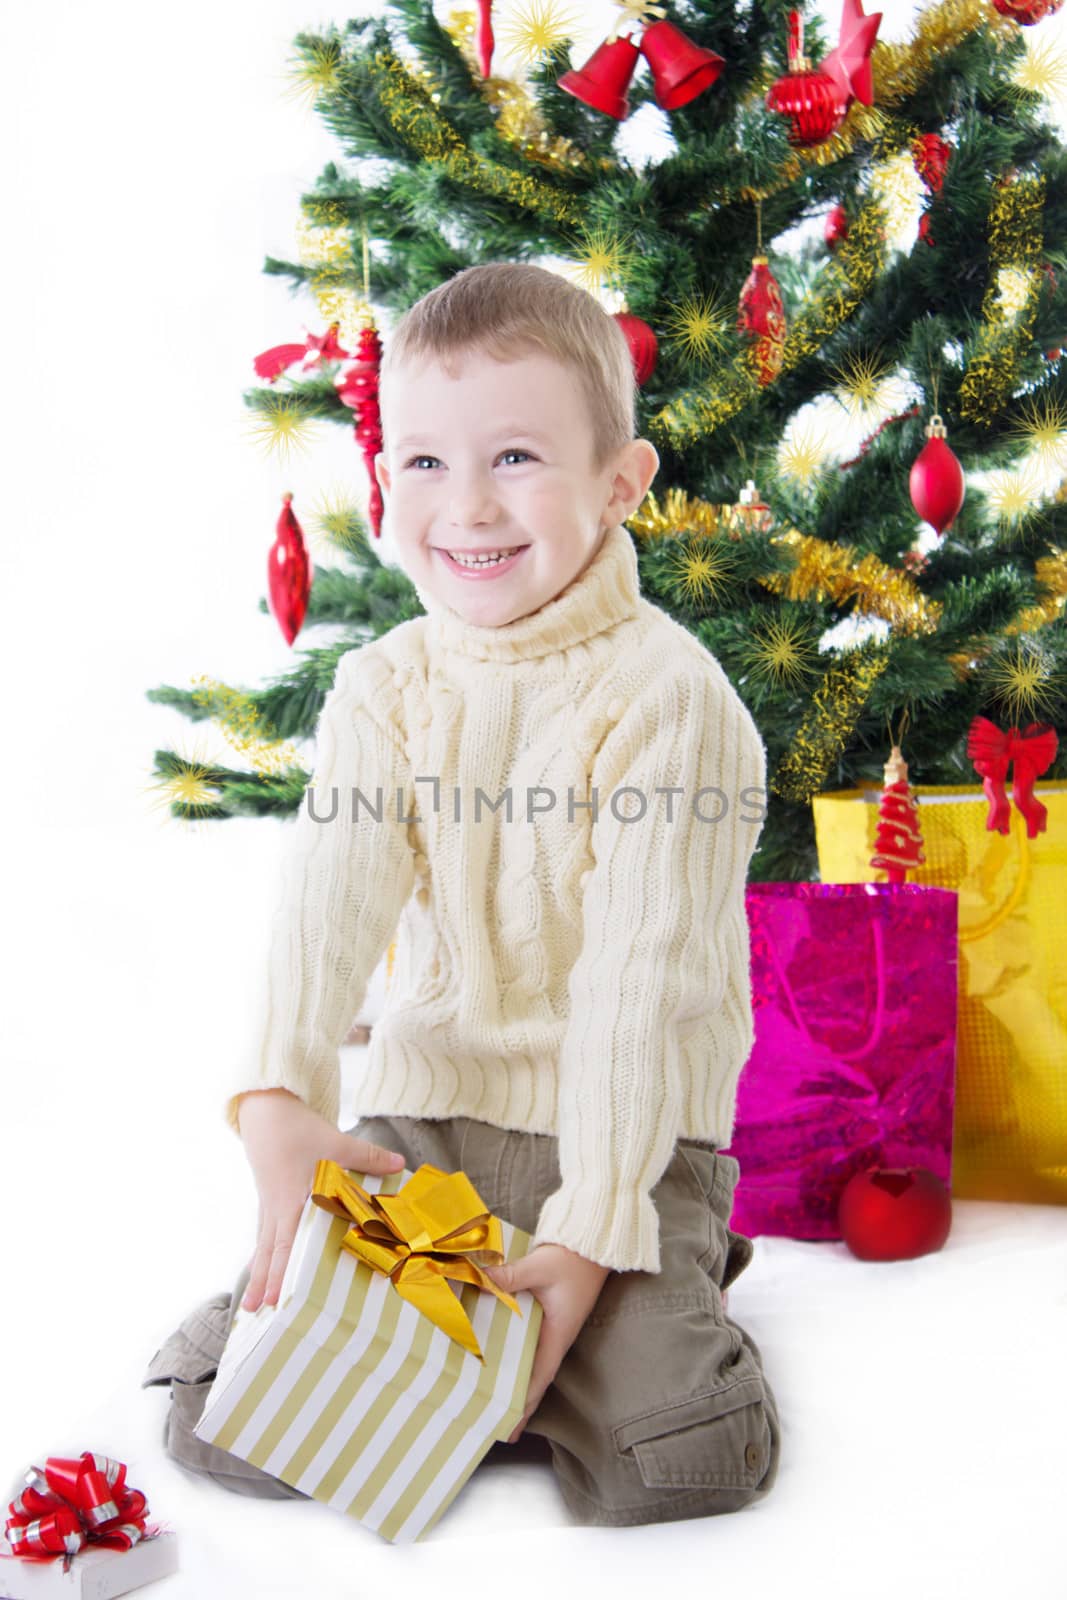 Boy with present box under Christmas tree by Angel_a